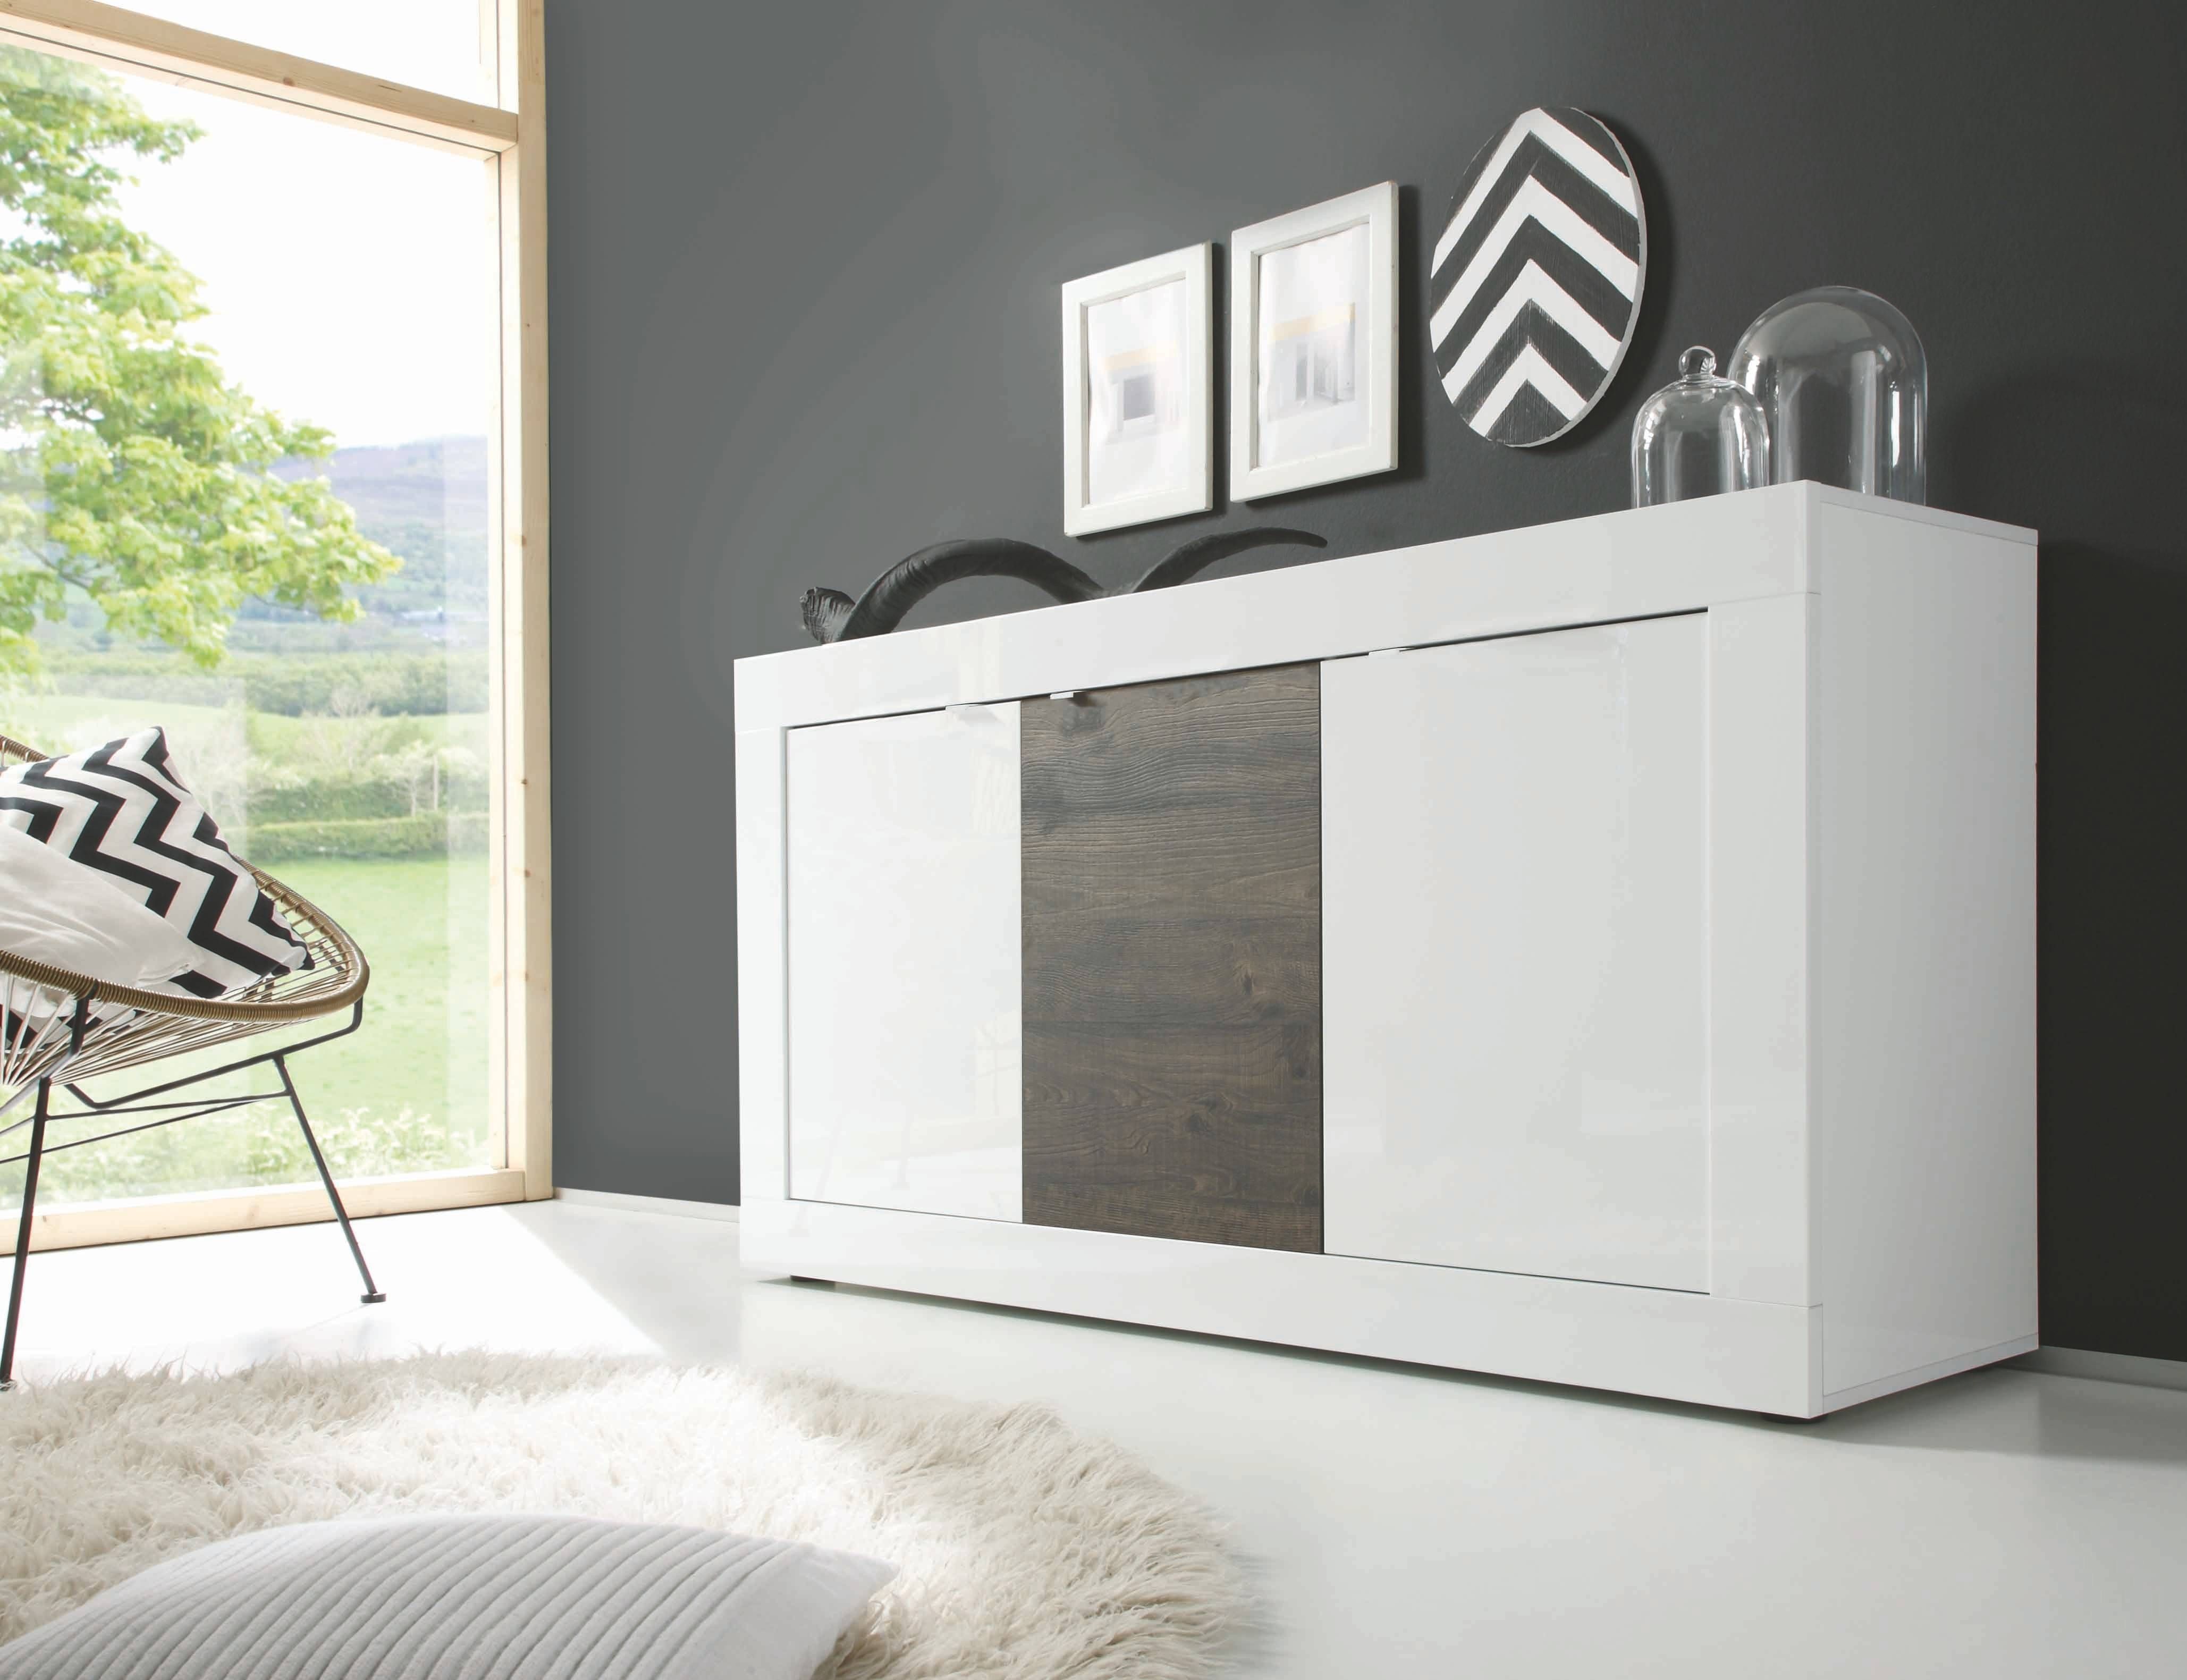 Basic 3 Door Sideboard, White + Wenge Buy Online At Best Price Within Current Wenge Sideboards (View 4 of 15)